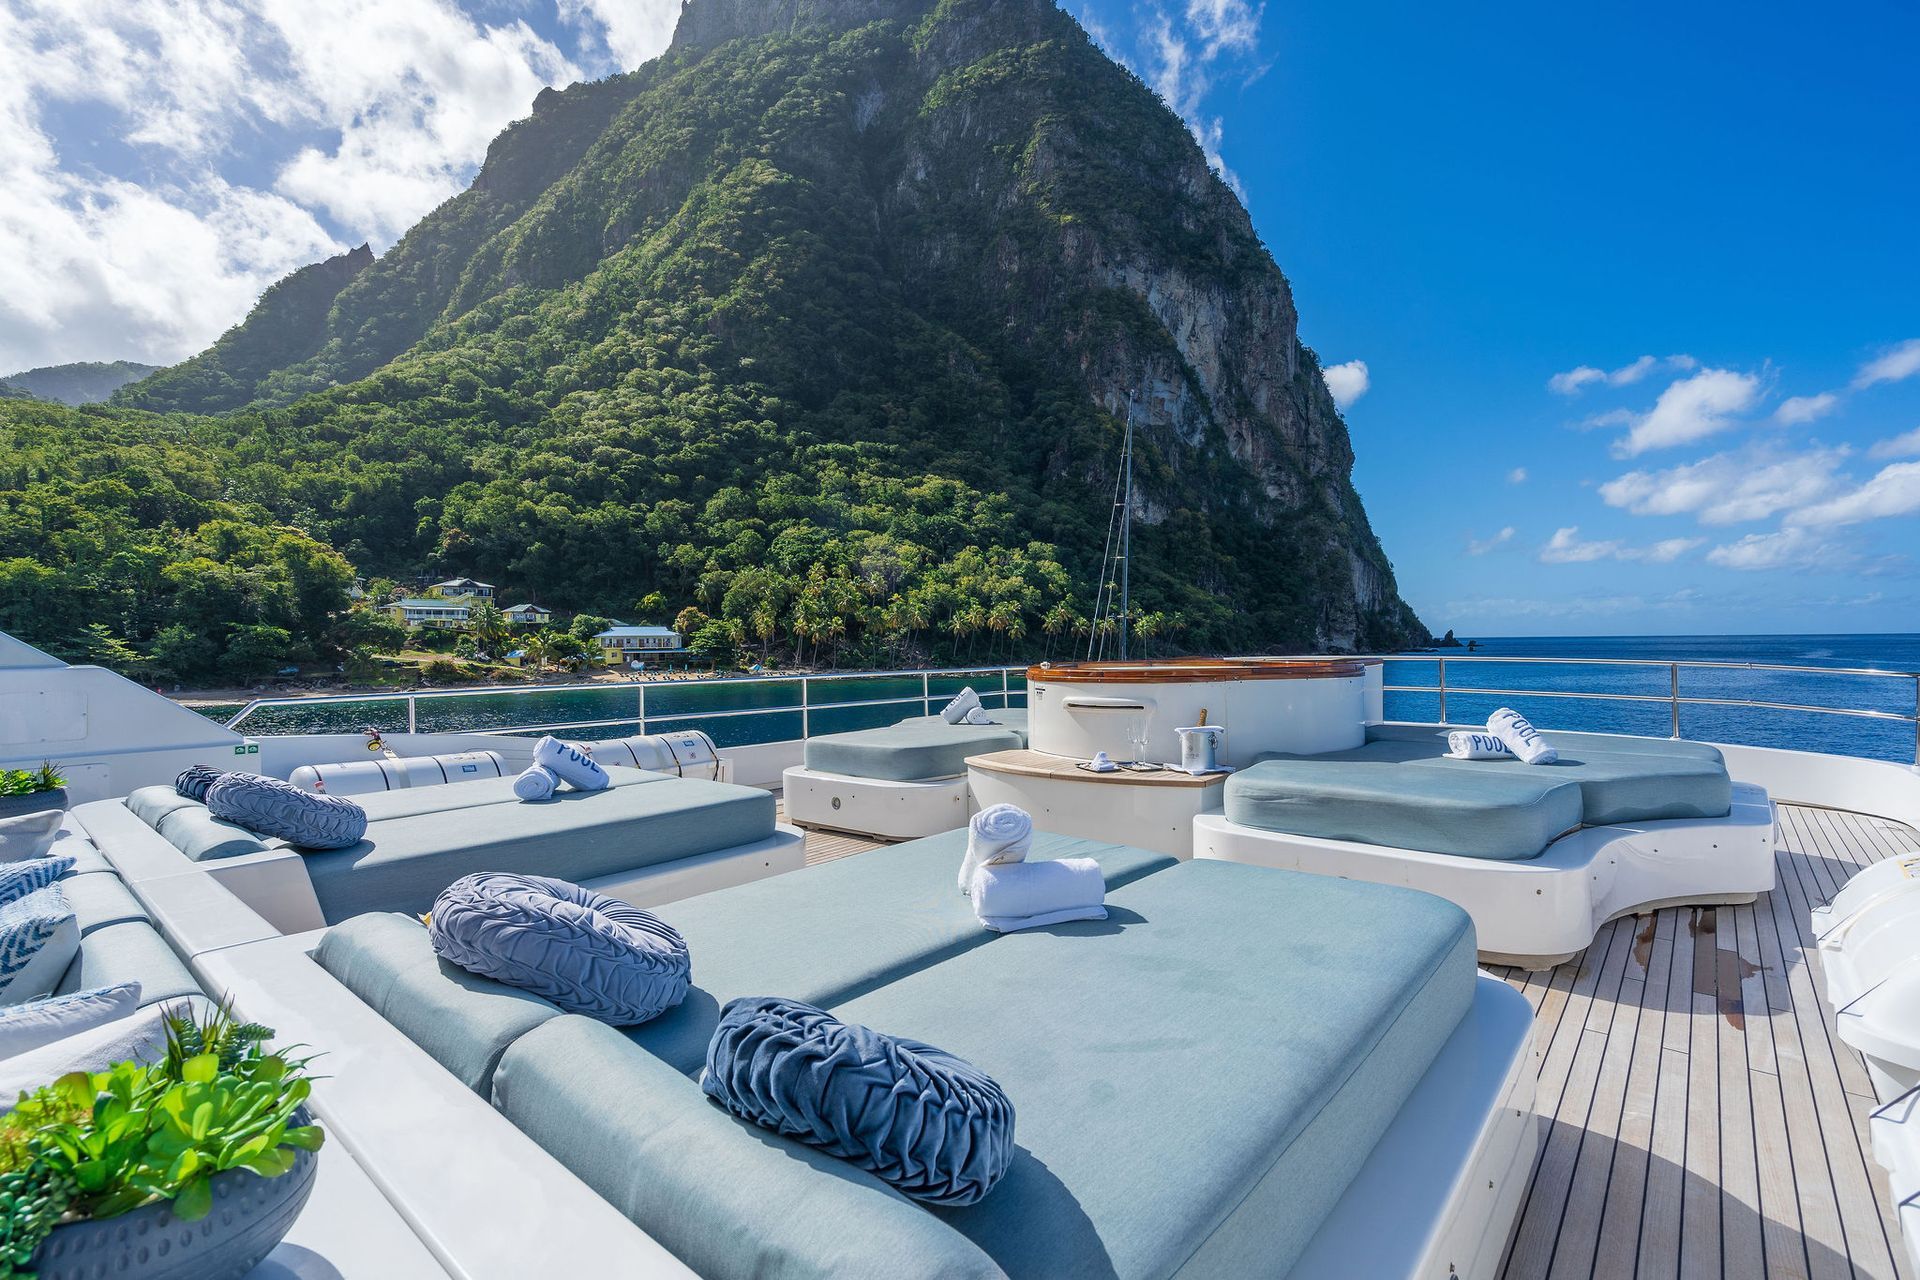 there are a lot of beds on the deck of a yacht